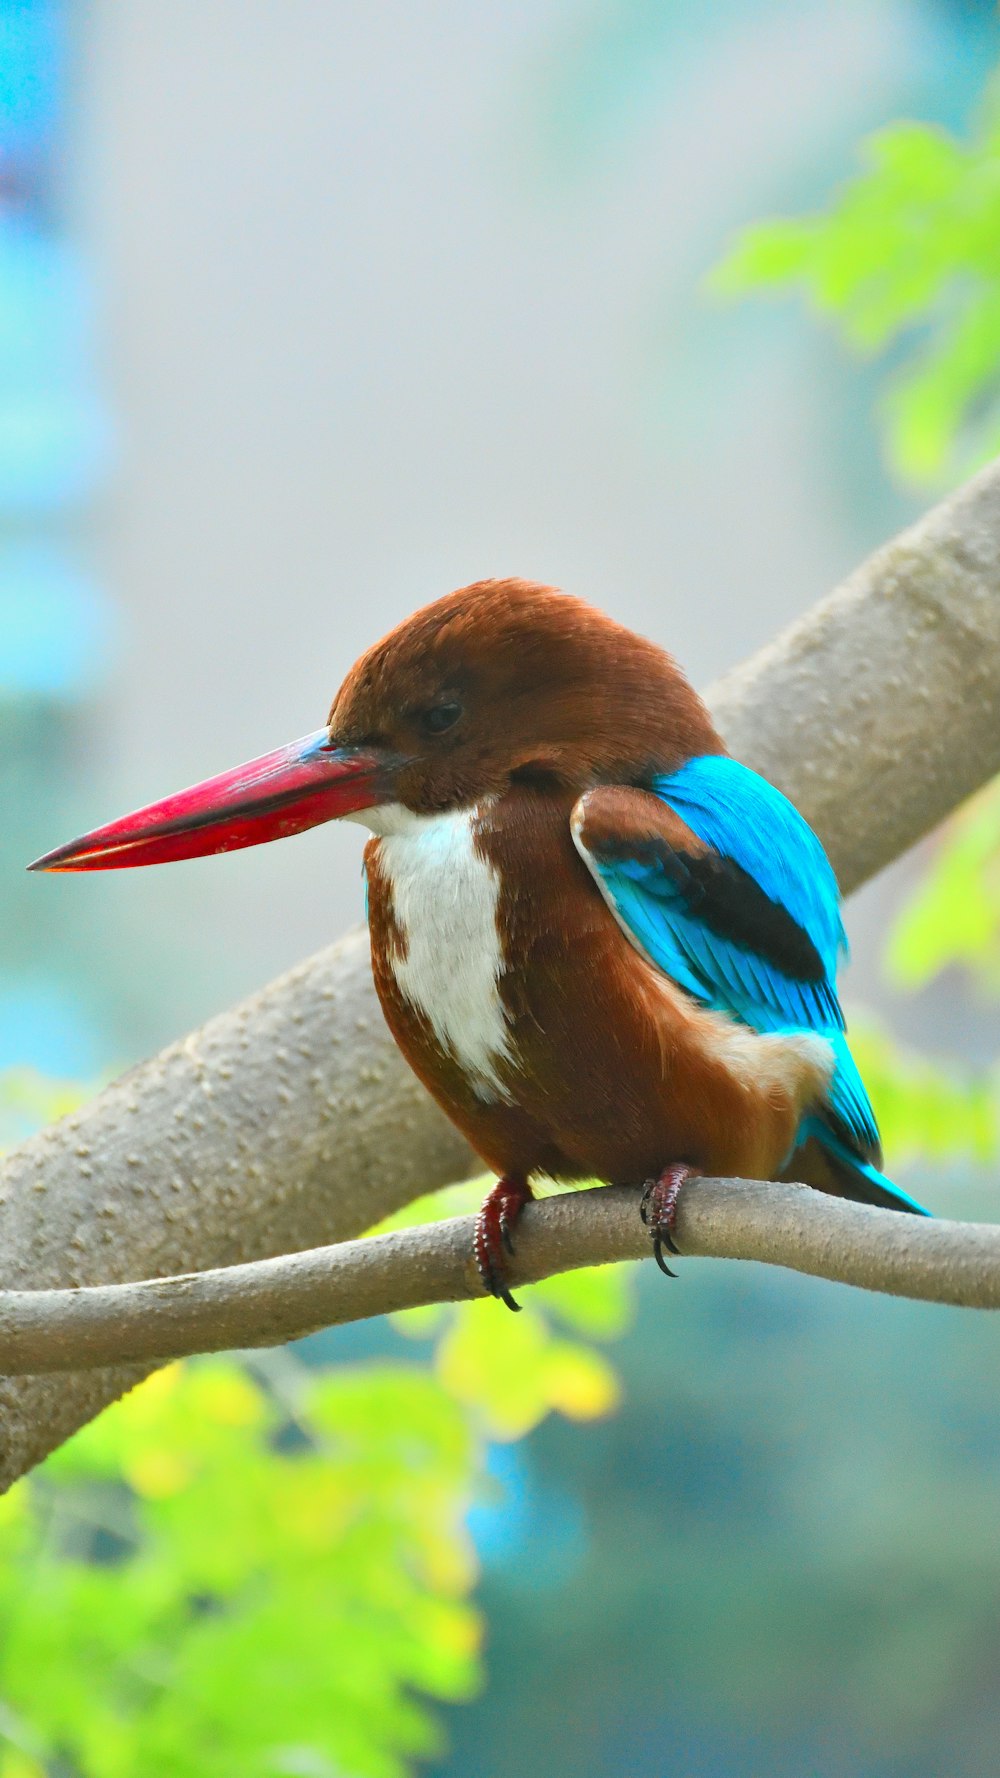 a colorful bird sitting on a tree branch